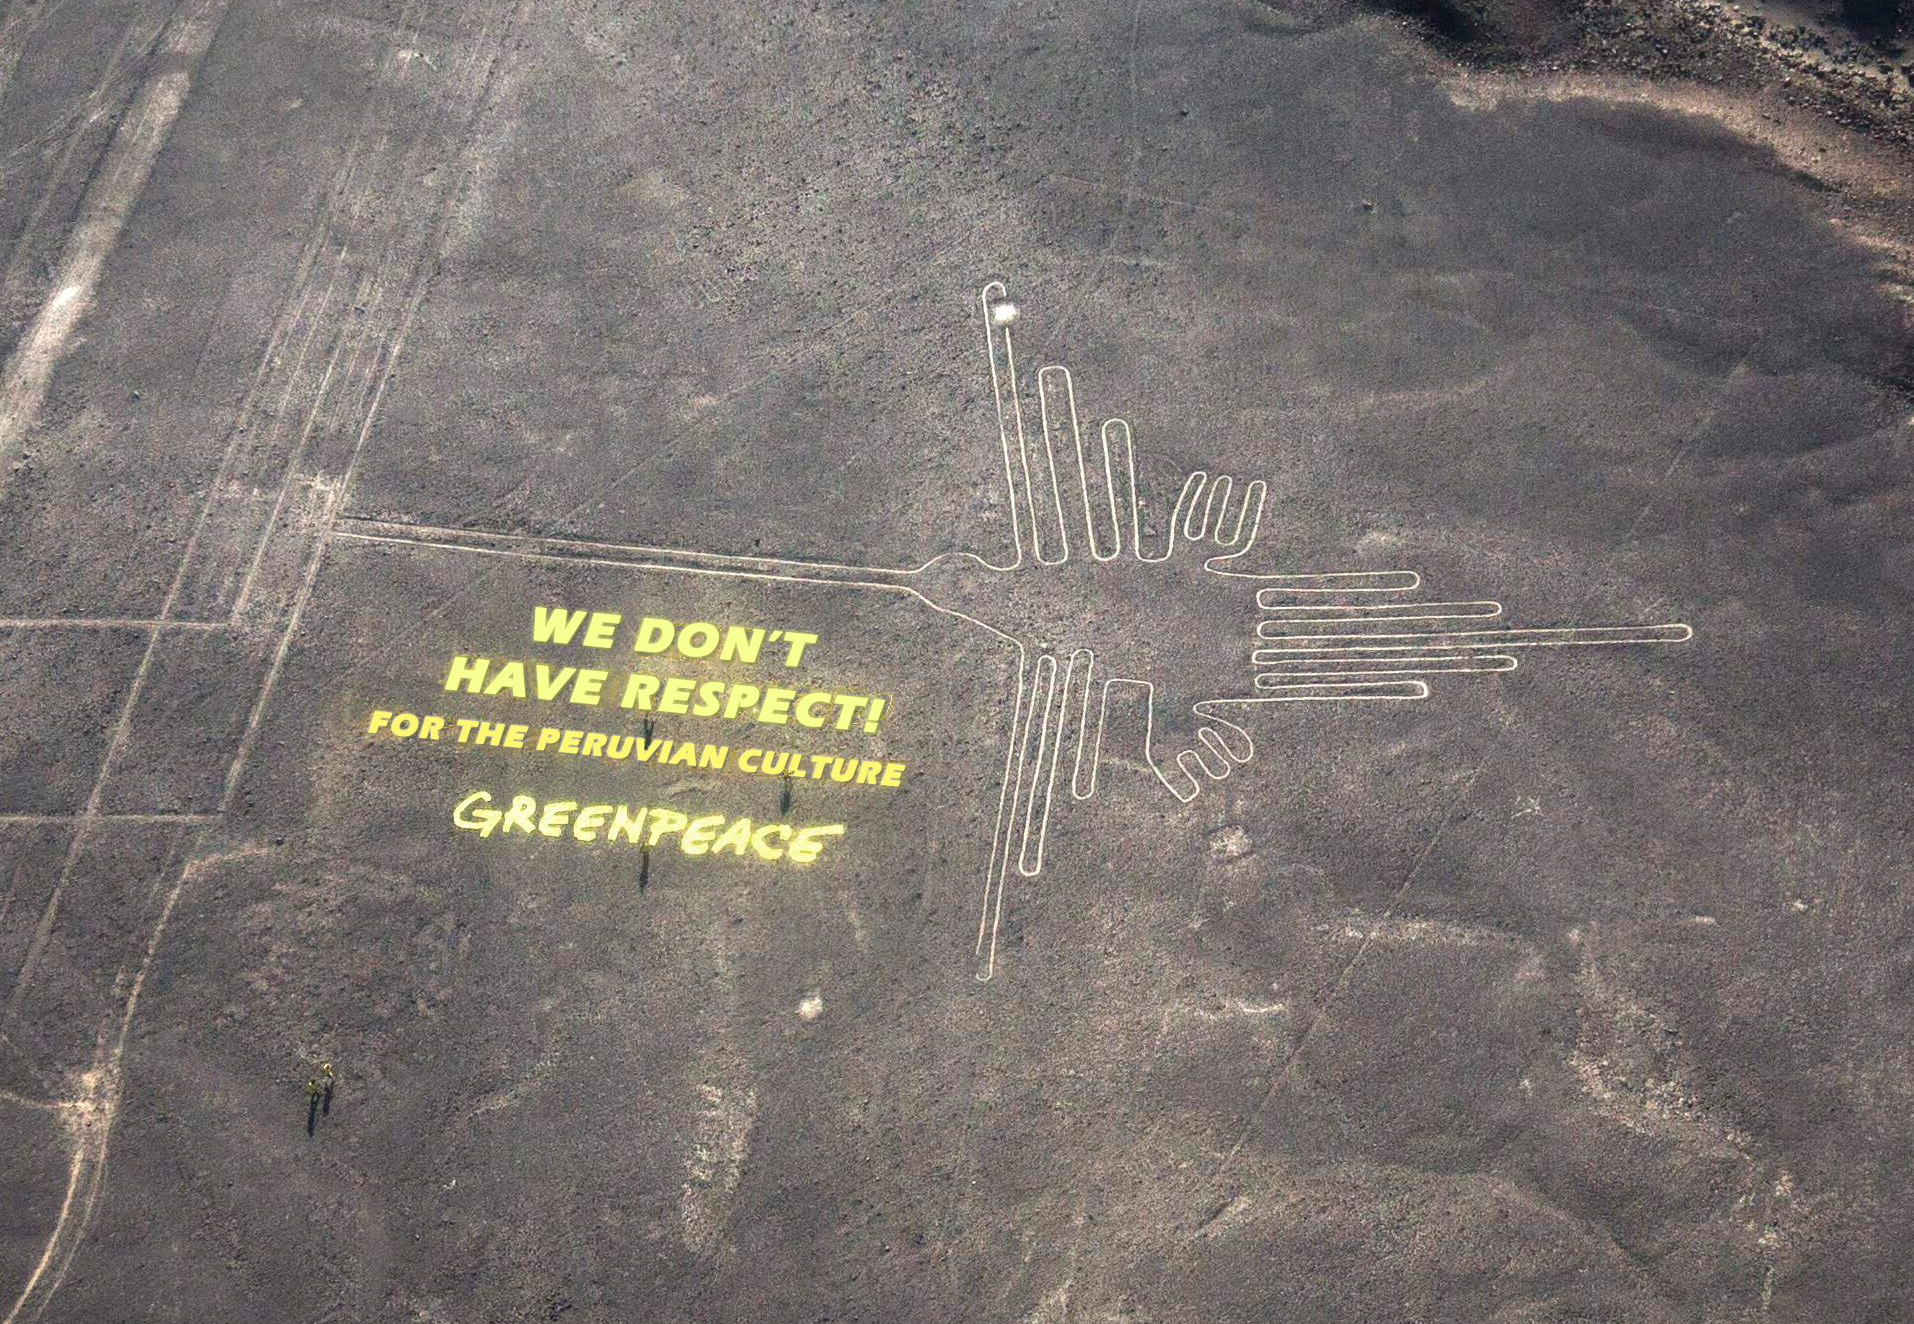 Nazca Lines, Hummingbird, Greenpeace, don't have respect for the Peruvian Culture